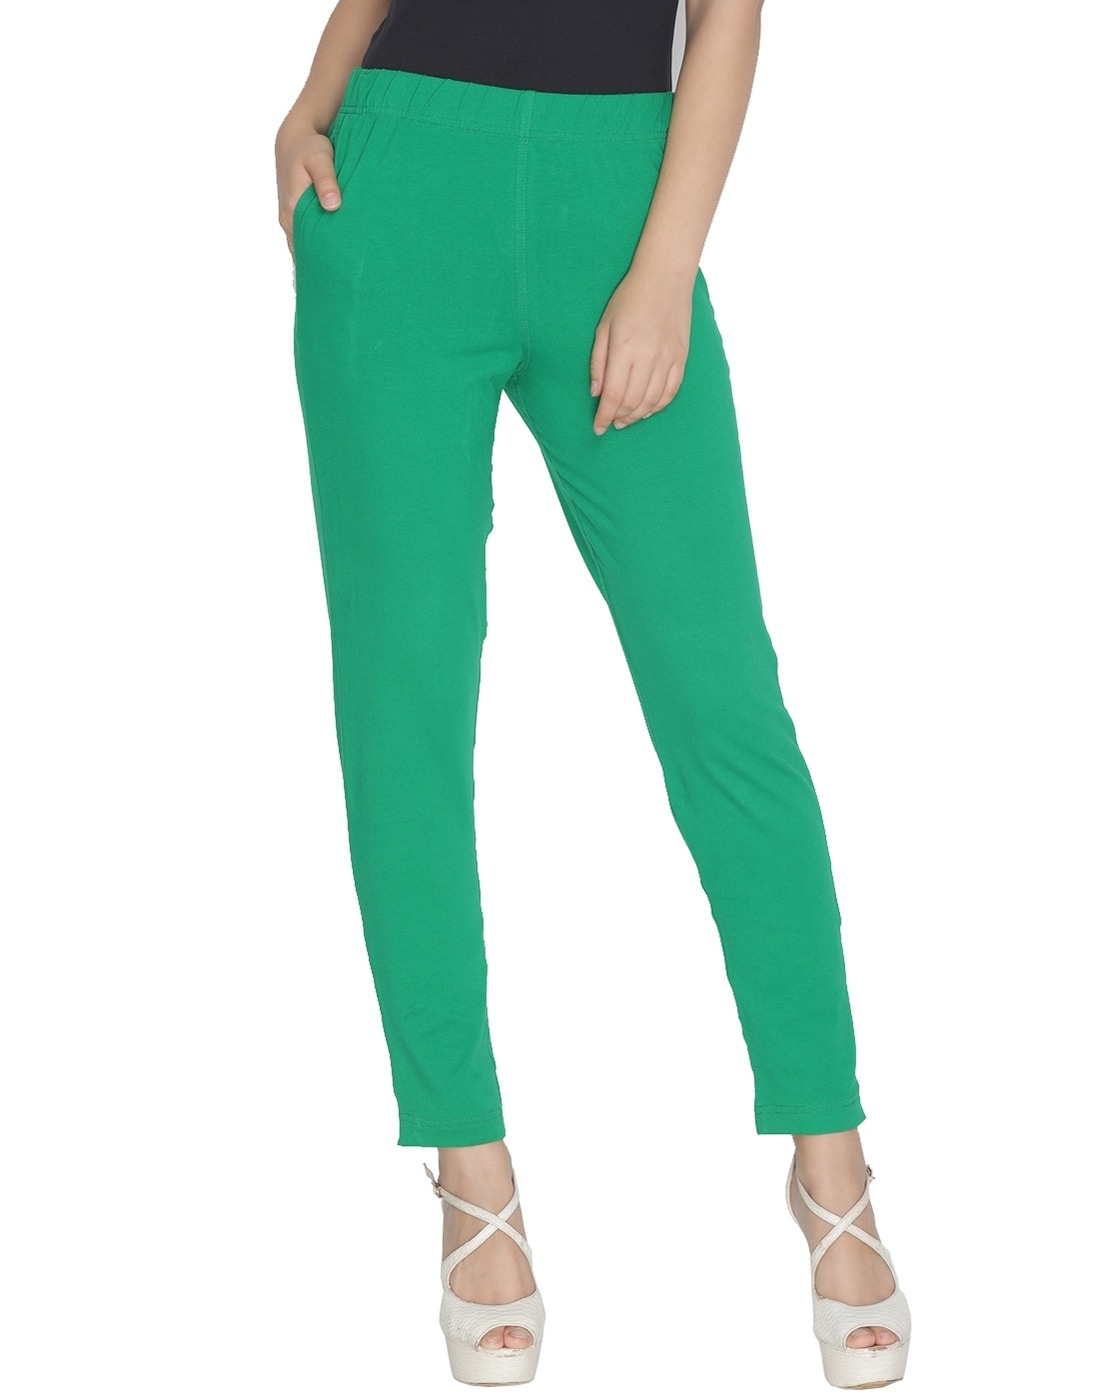 Lyra Pants  Buy Lyra Solid Coloured Free Size Kurti Pant for WomenGreen  Online  Nykaa Fashion